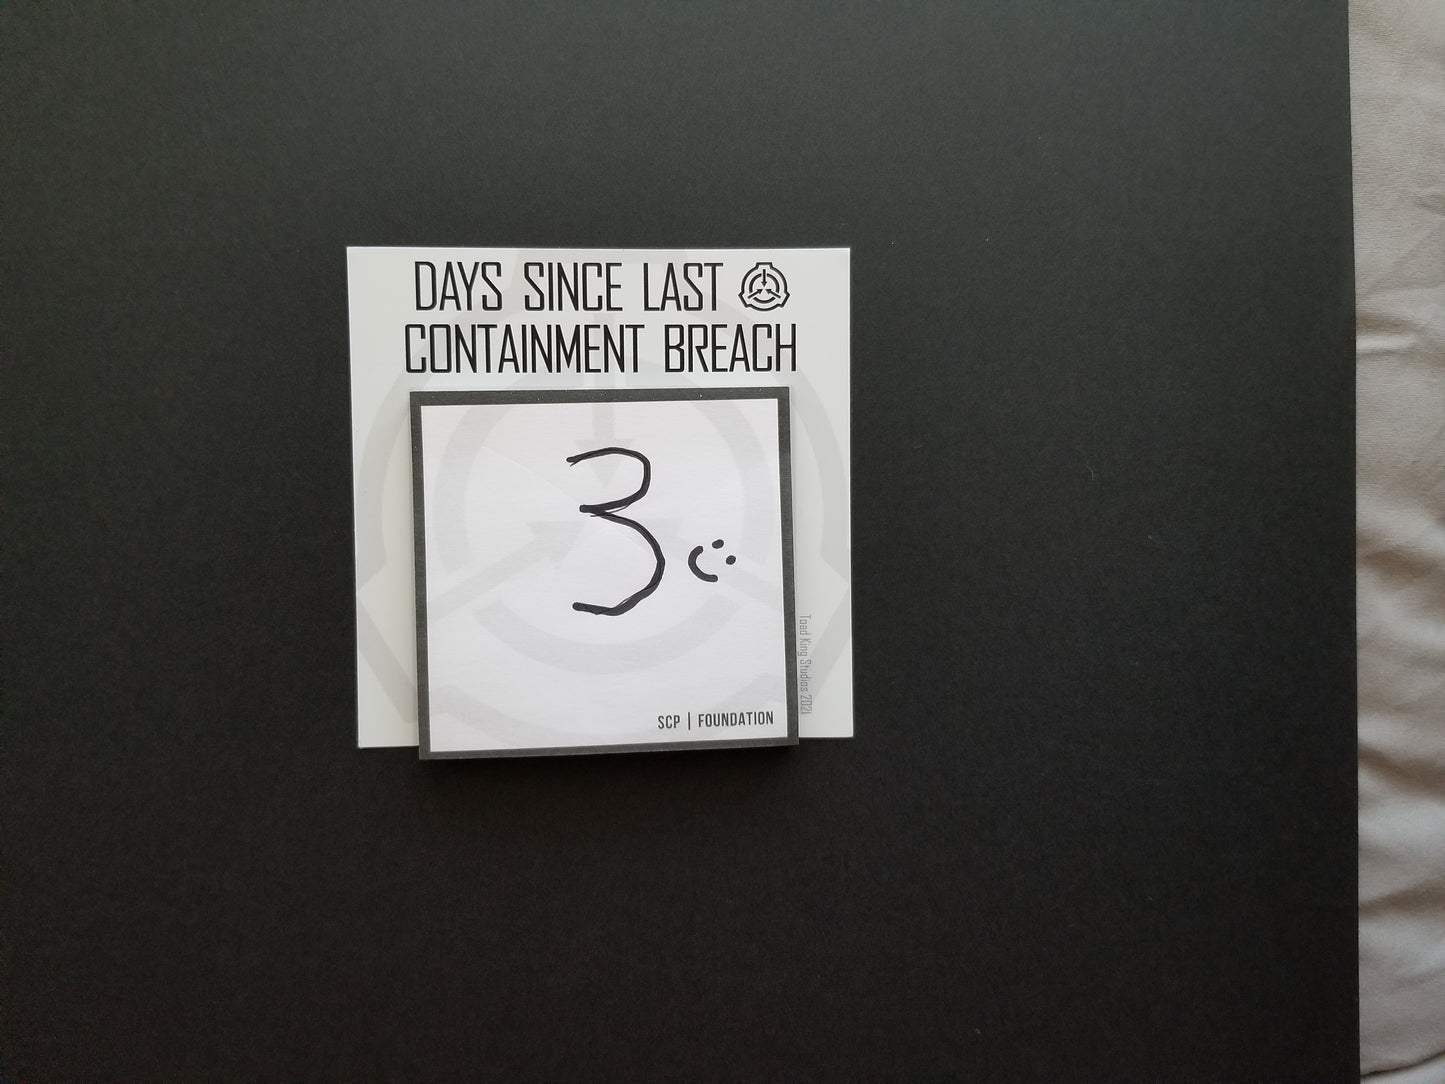 Days Since Last Containment Breach Magnet